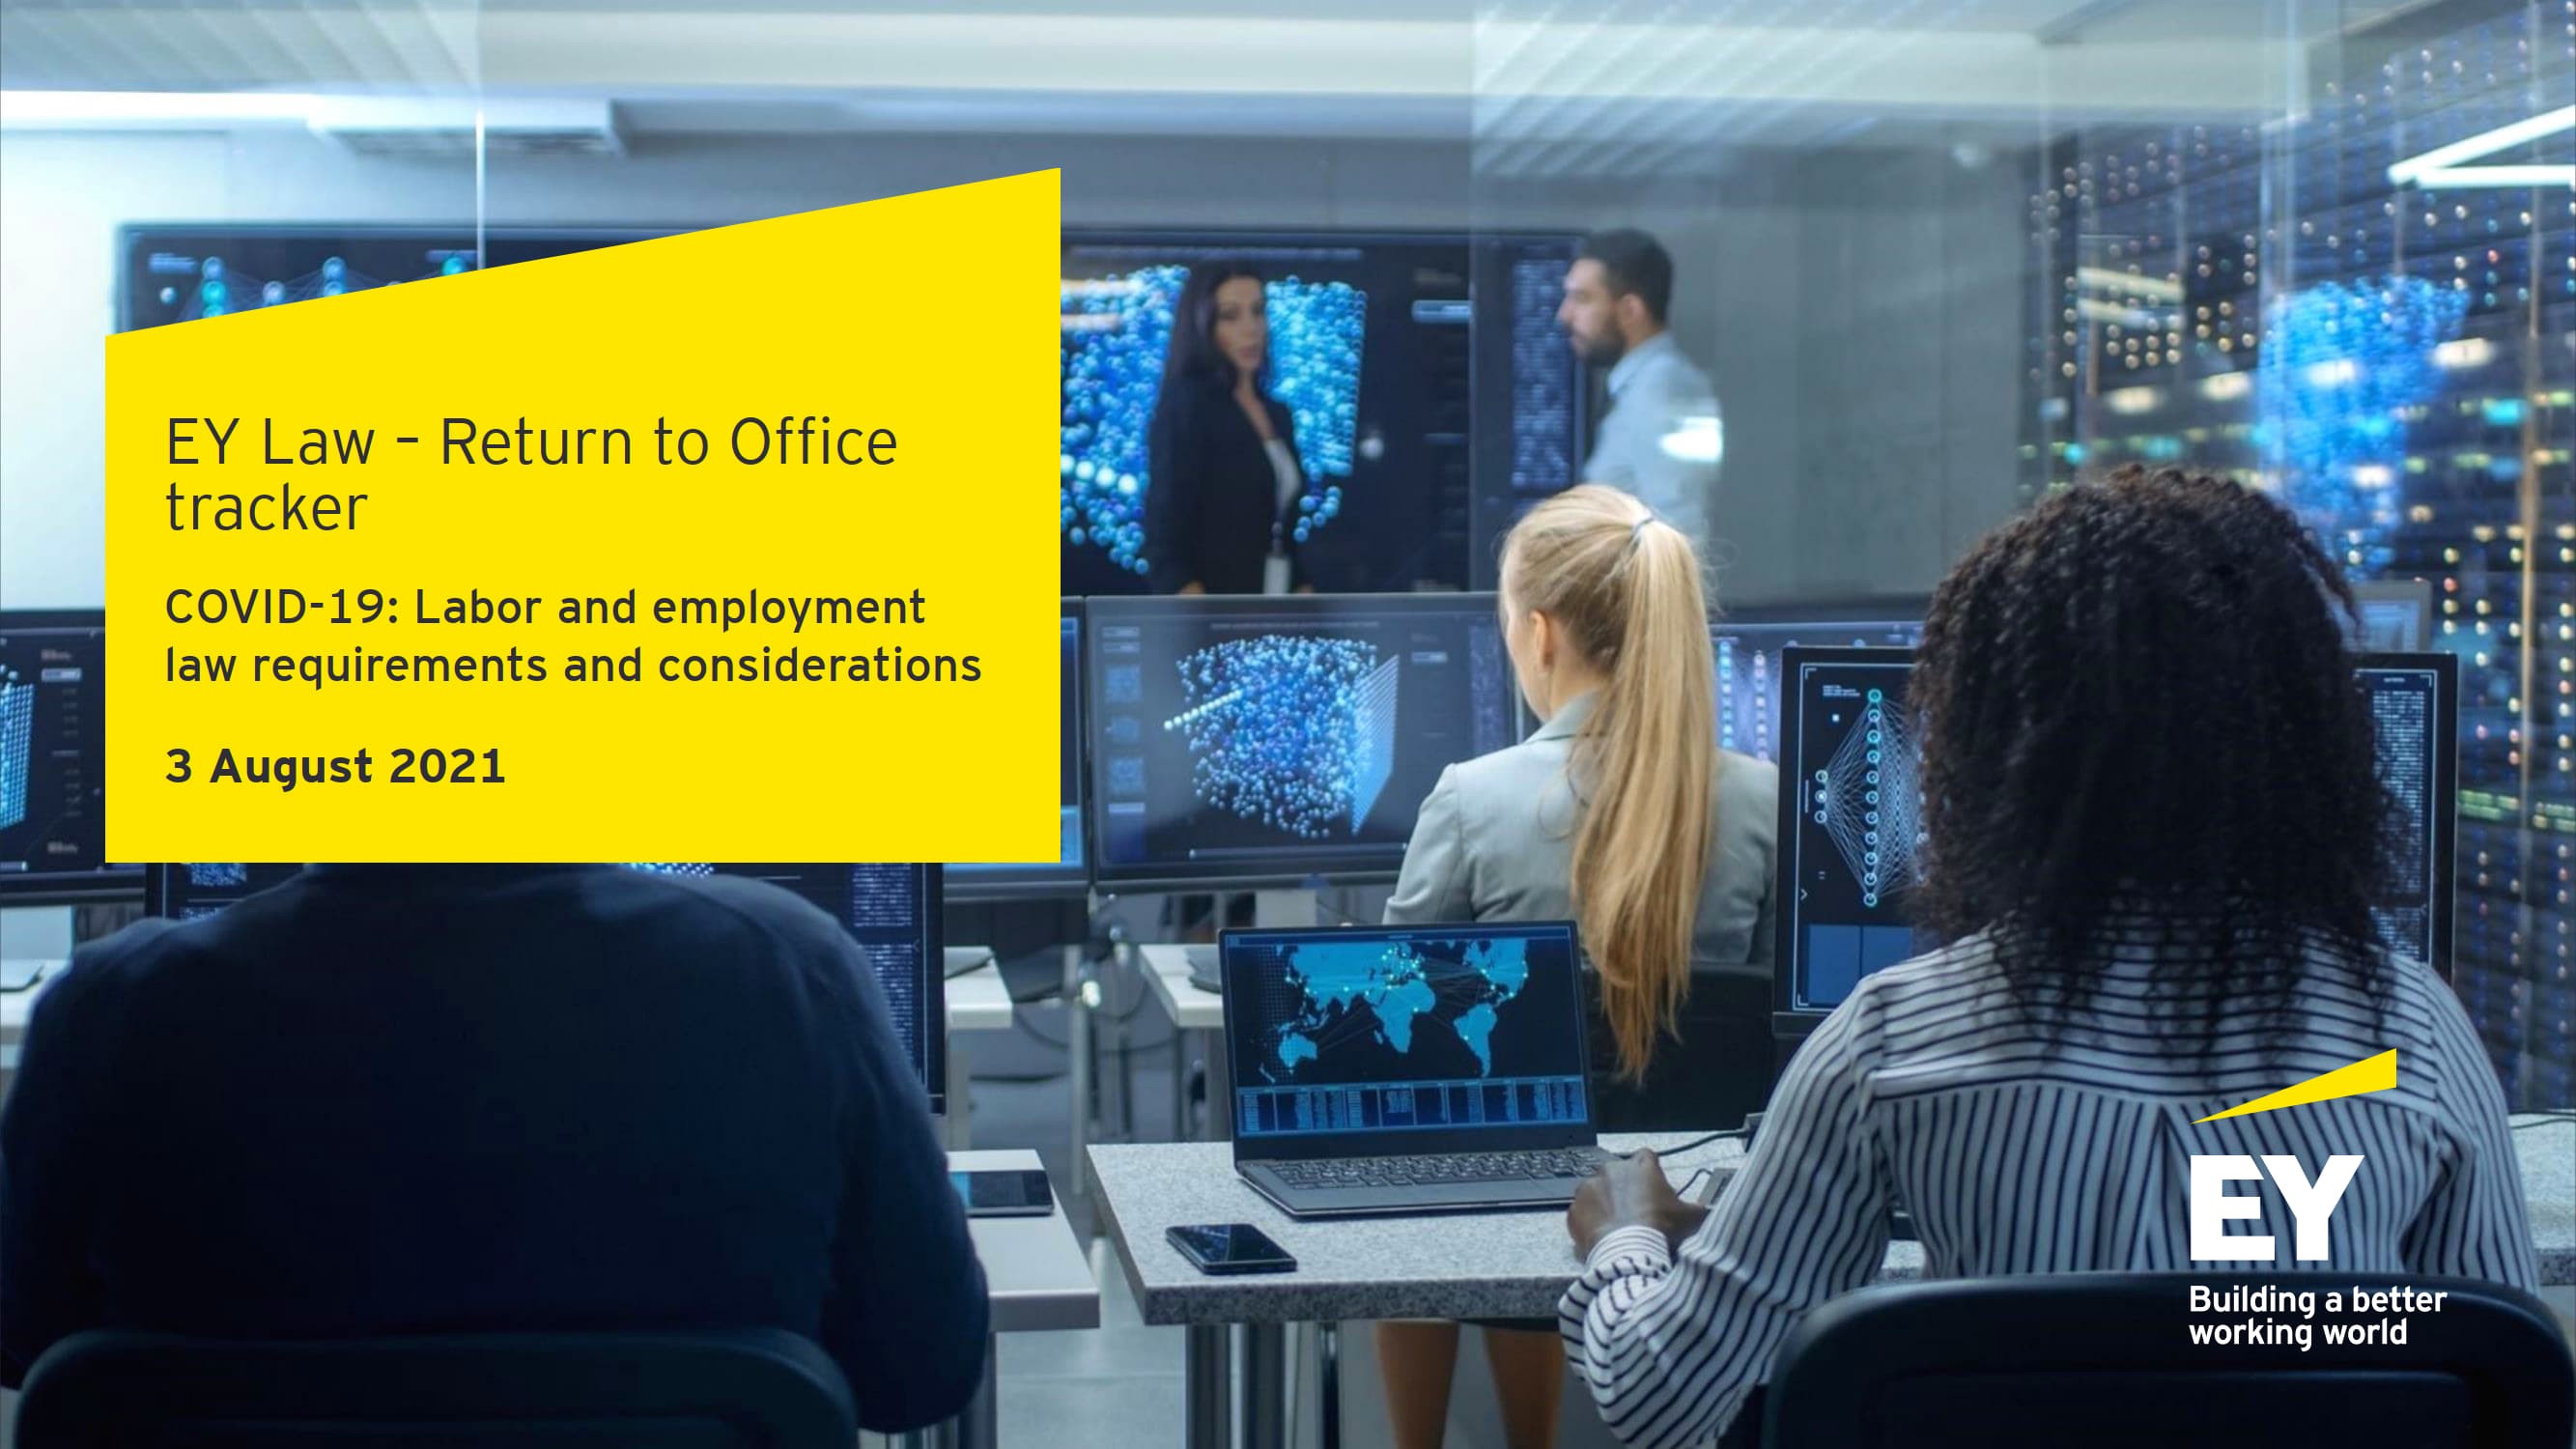 EY Law – Return to Office tracker COVID-19: Labor and employment law requirements and considerations, 3 August 2021